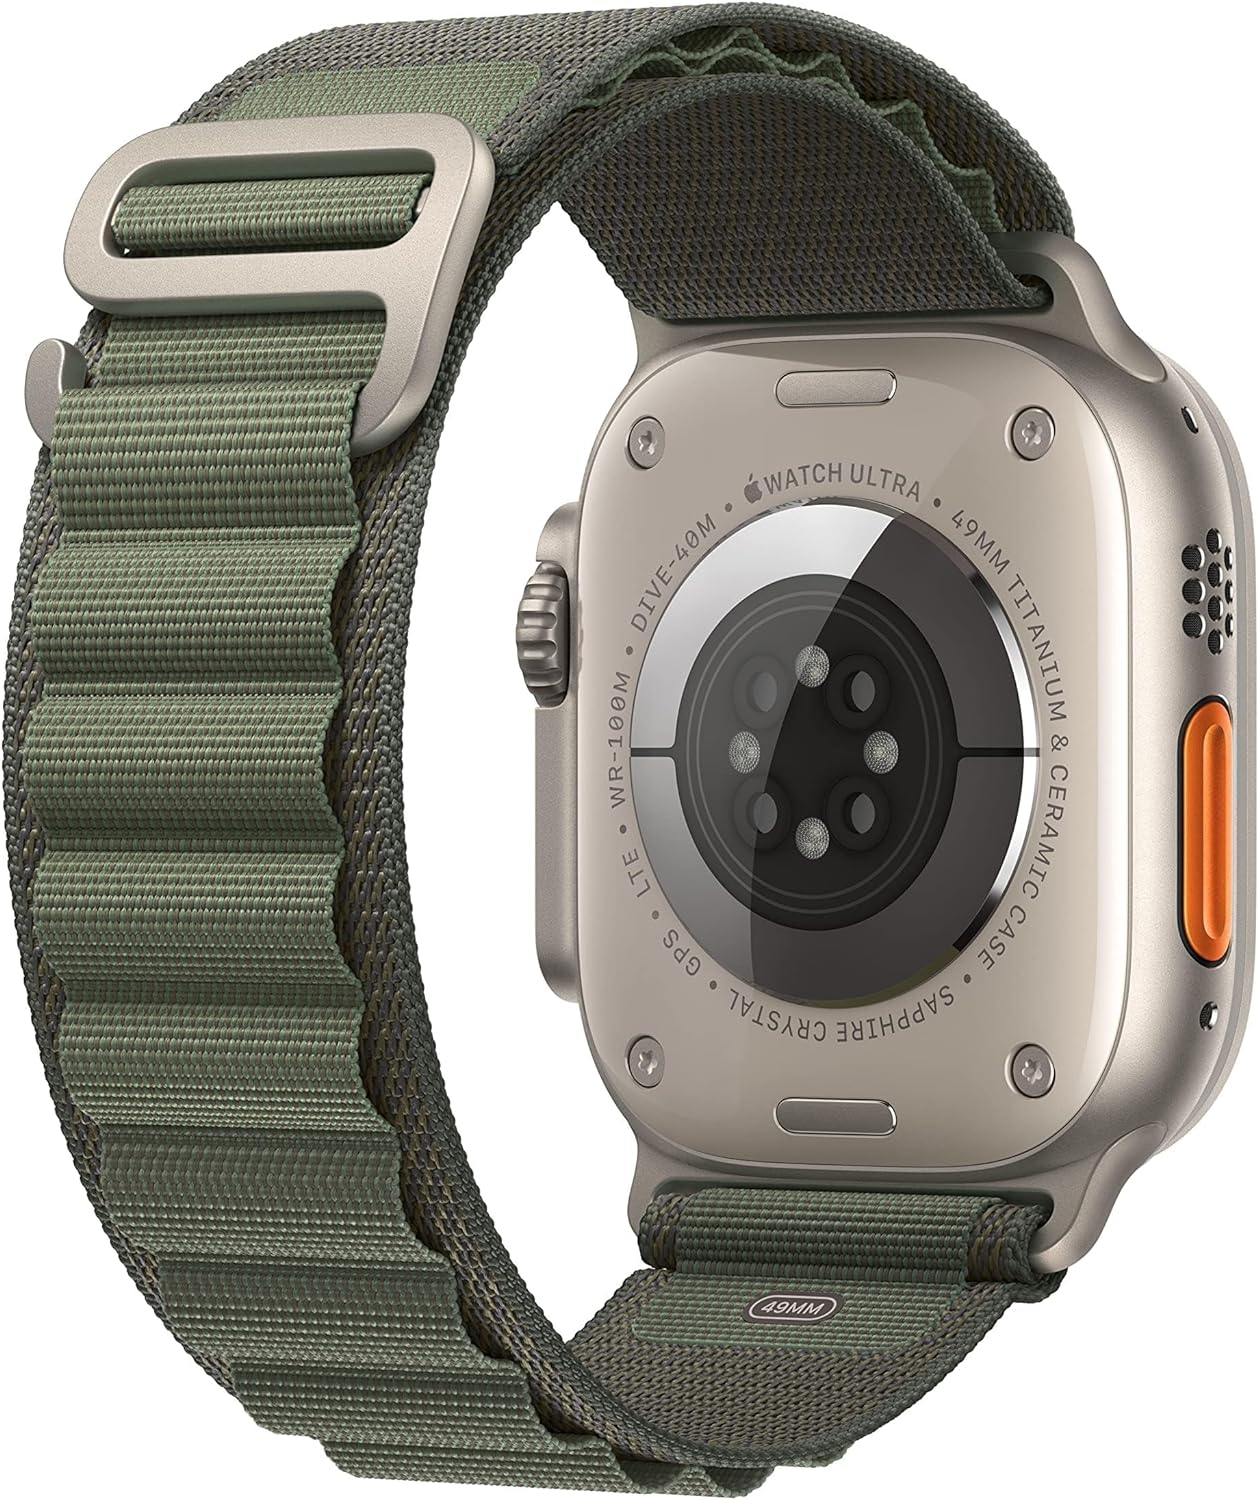 49mm titanium case with 100m water resistance and customizable Action button. 0194253144403